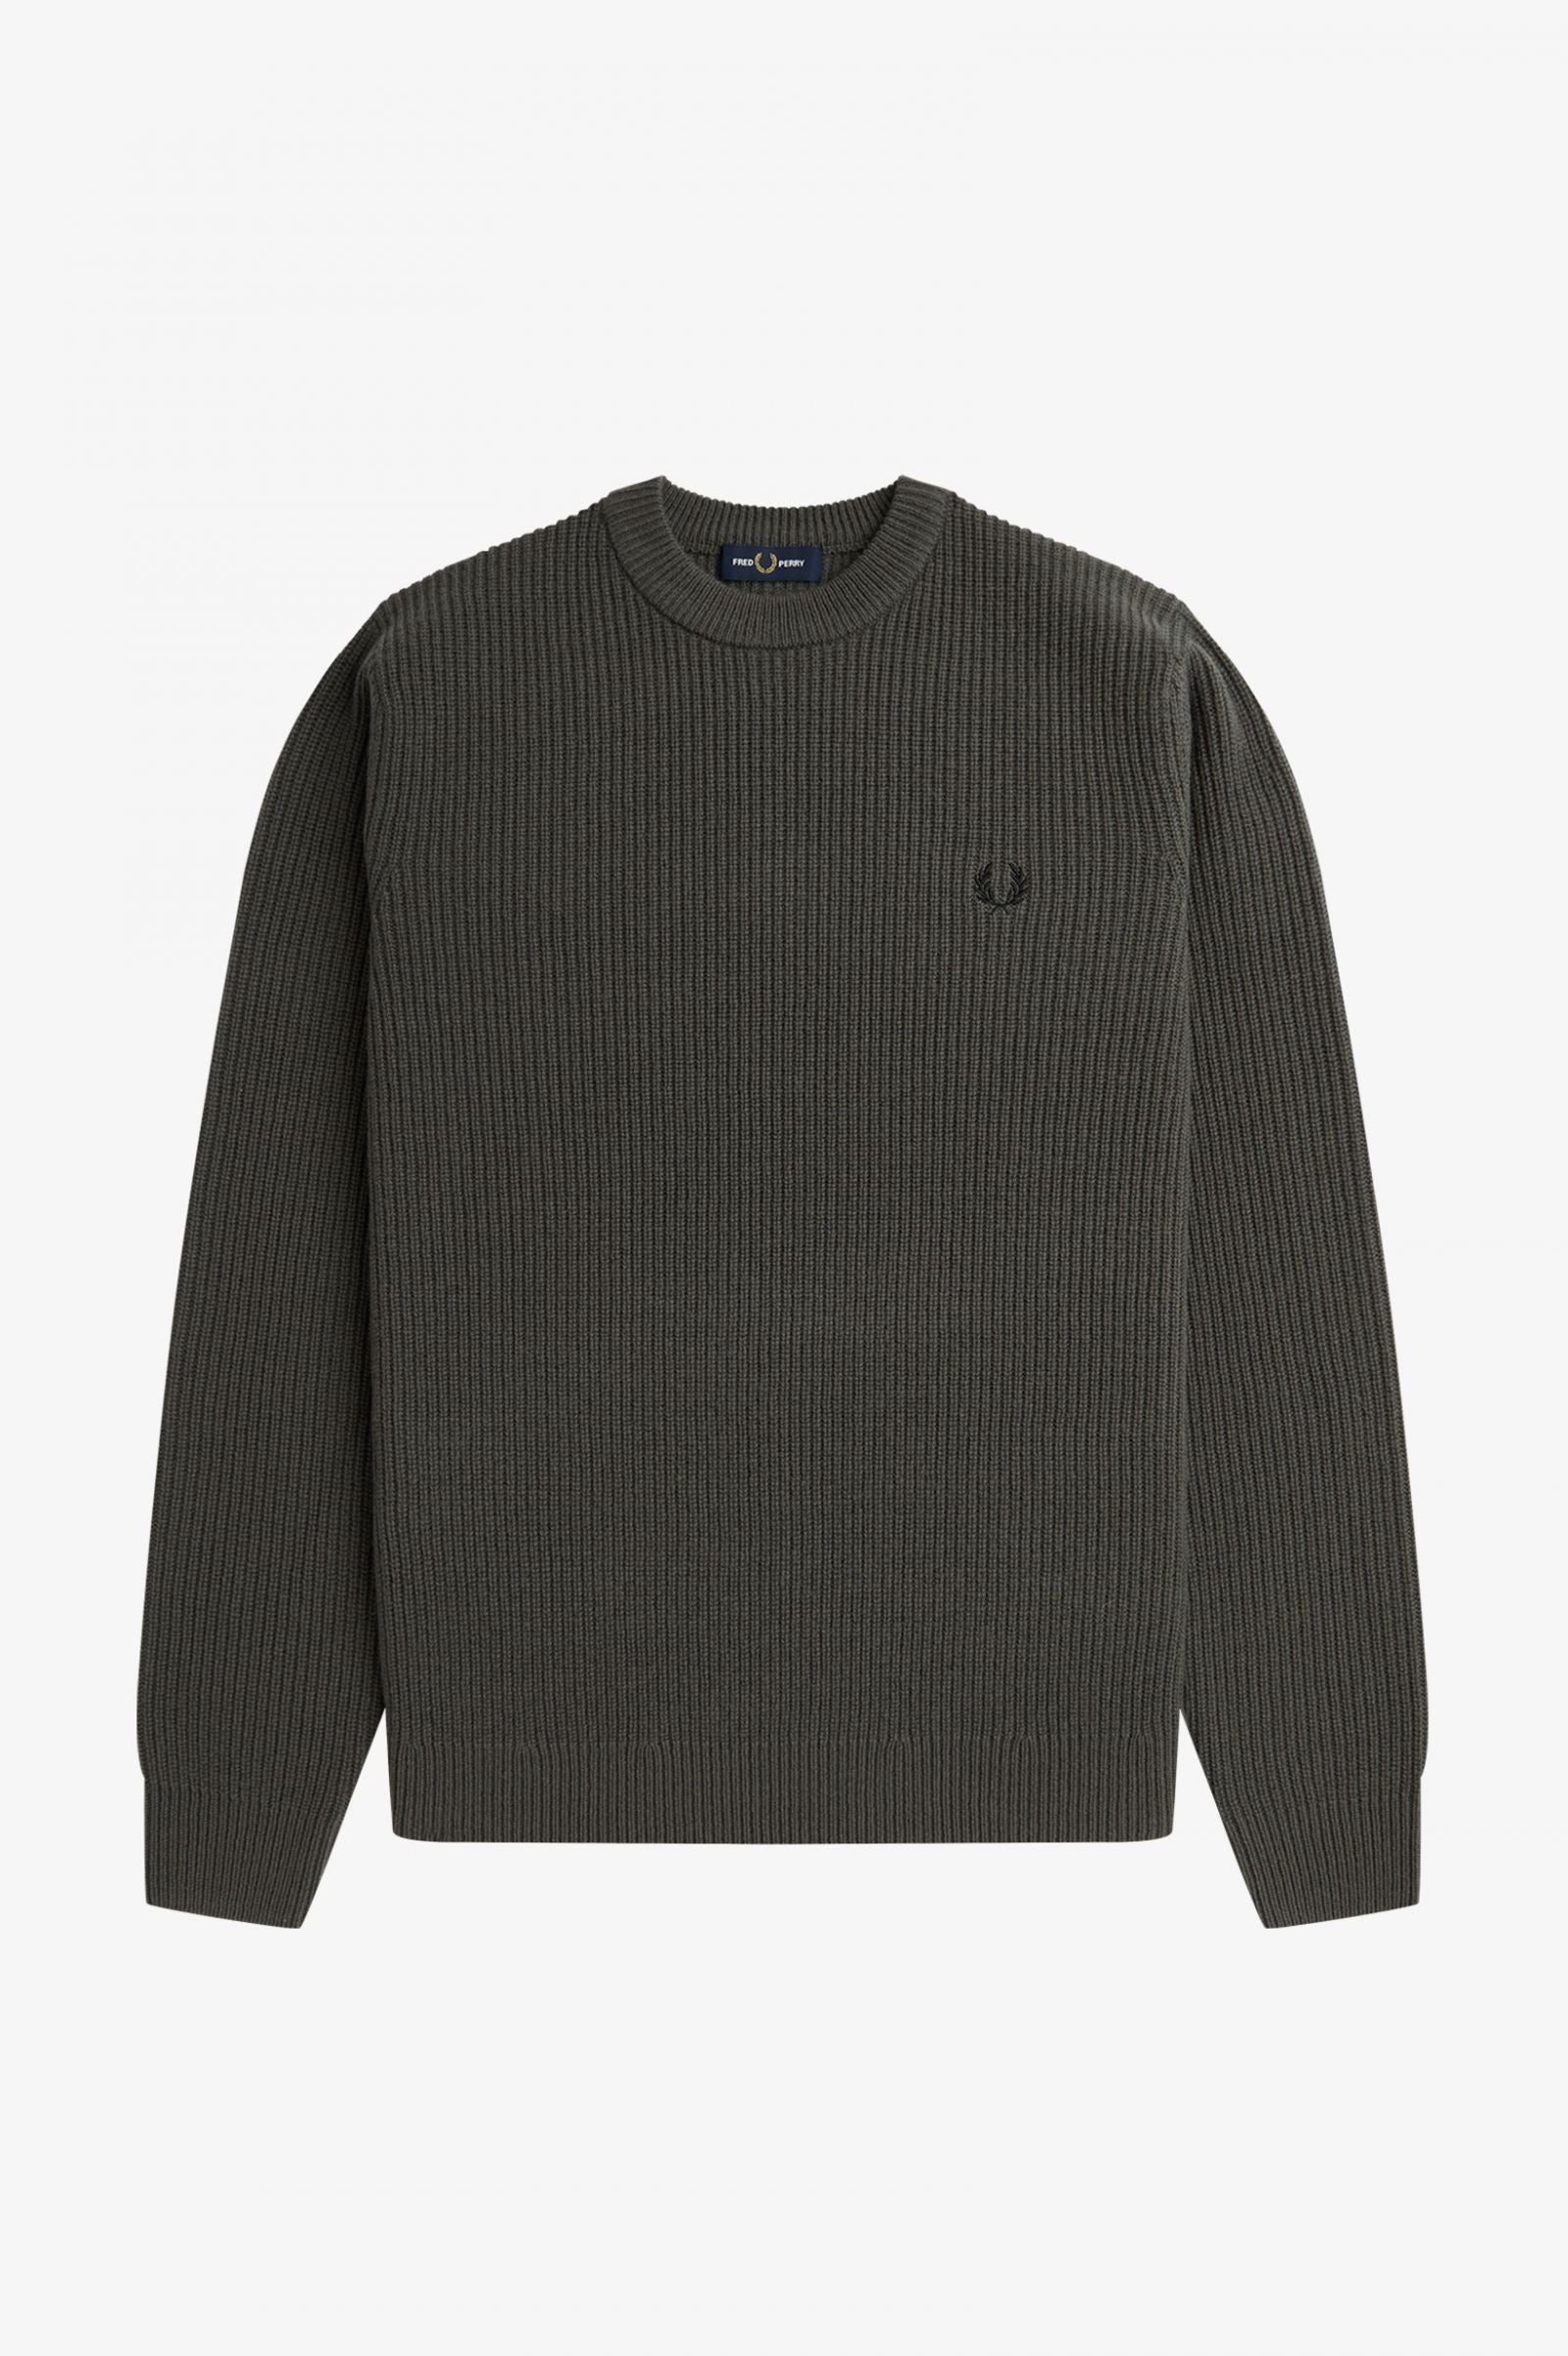 Fred Perry K6539 Texture Lambswool Jumper - Field Green– The